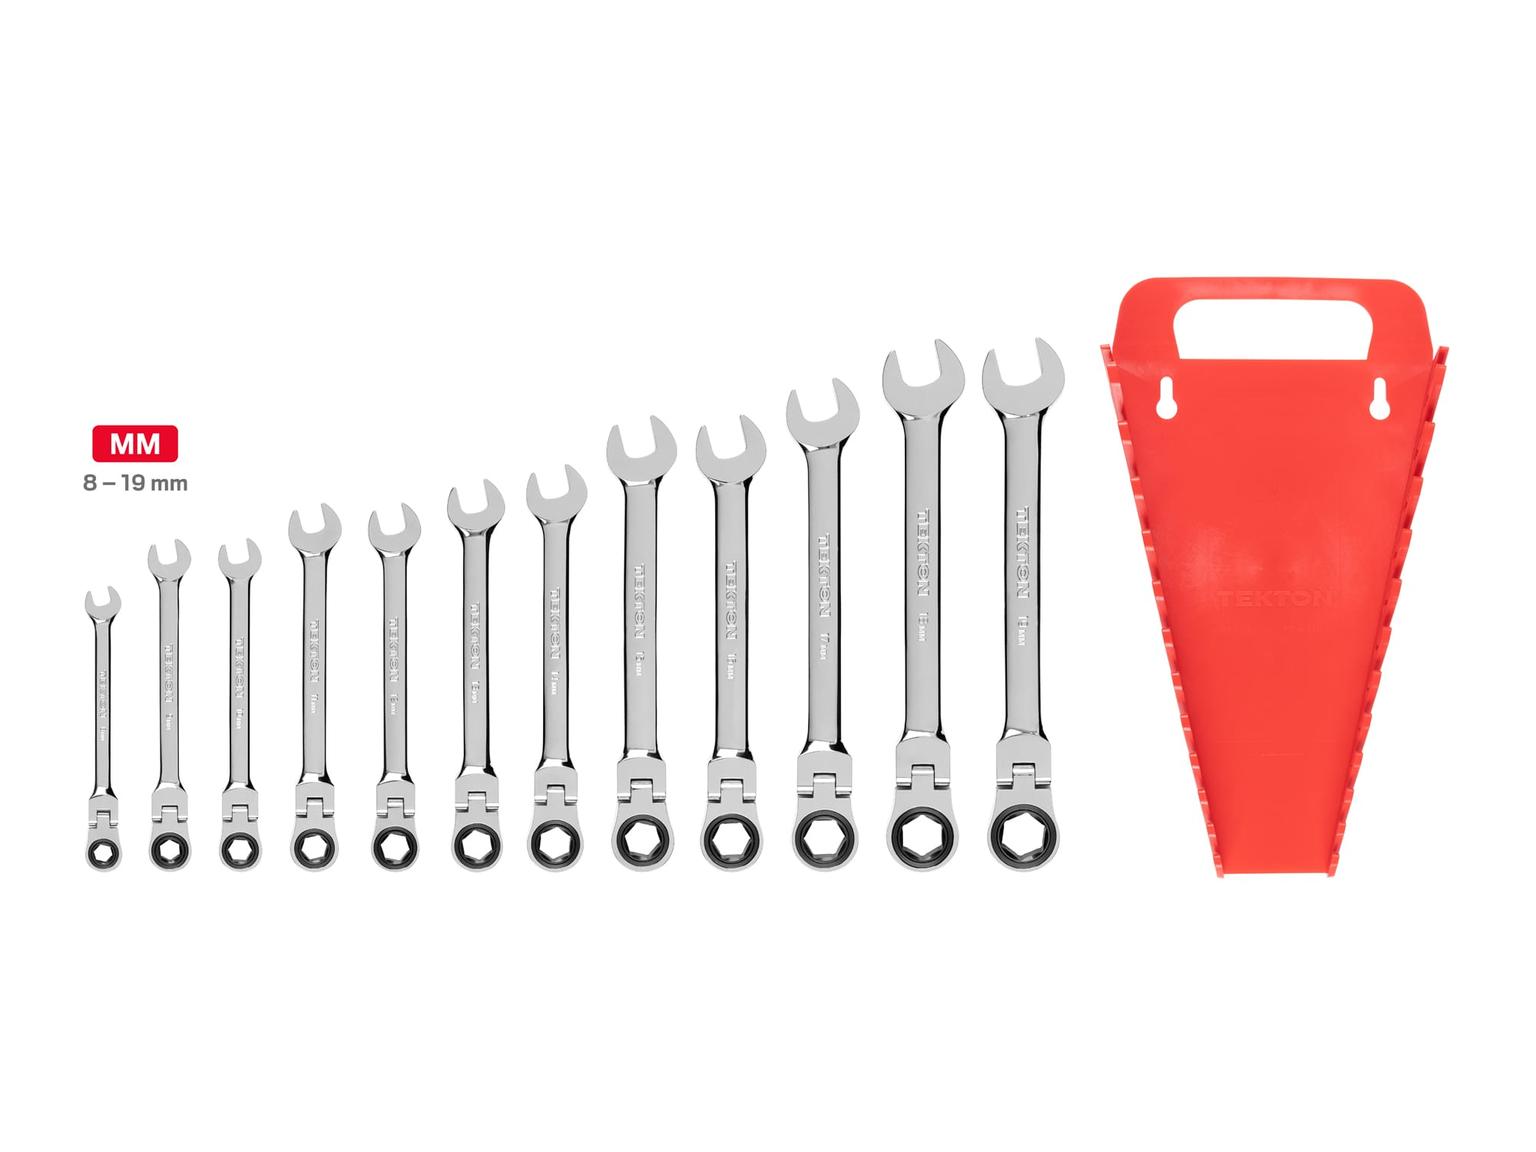 TEKTON WRN57170-T Flex Ratcheting Combination Wrench Set with Holder, 12-Piece (8-19 mm)